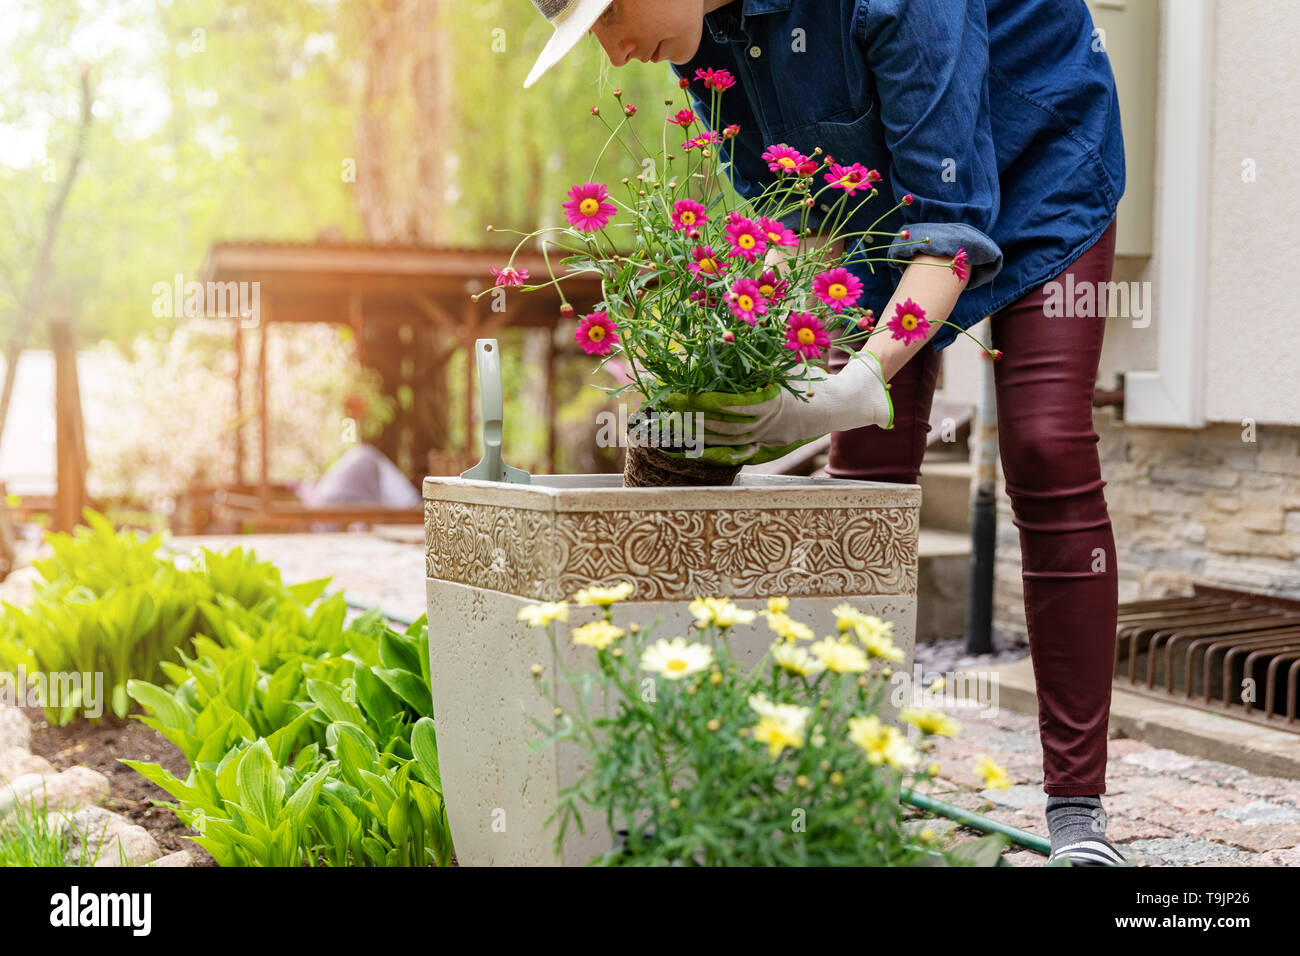 woman planting flowers in pot at home garden Stock Photo